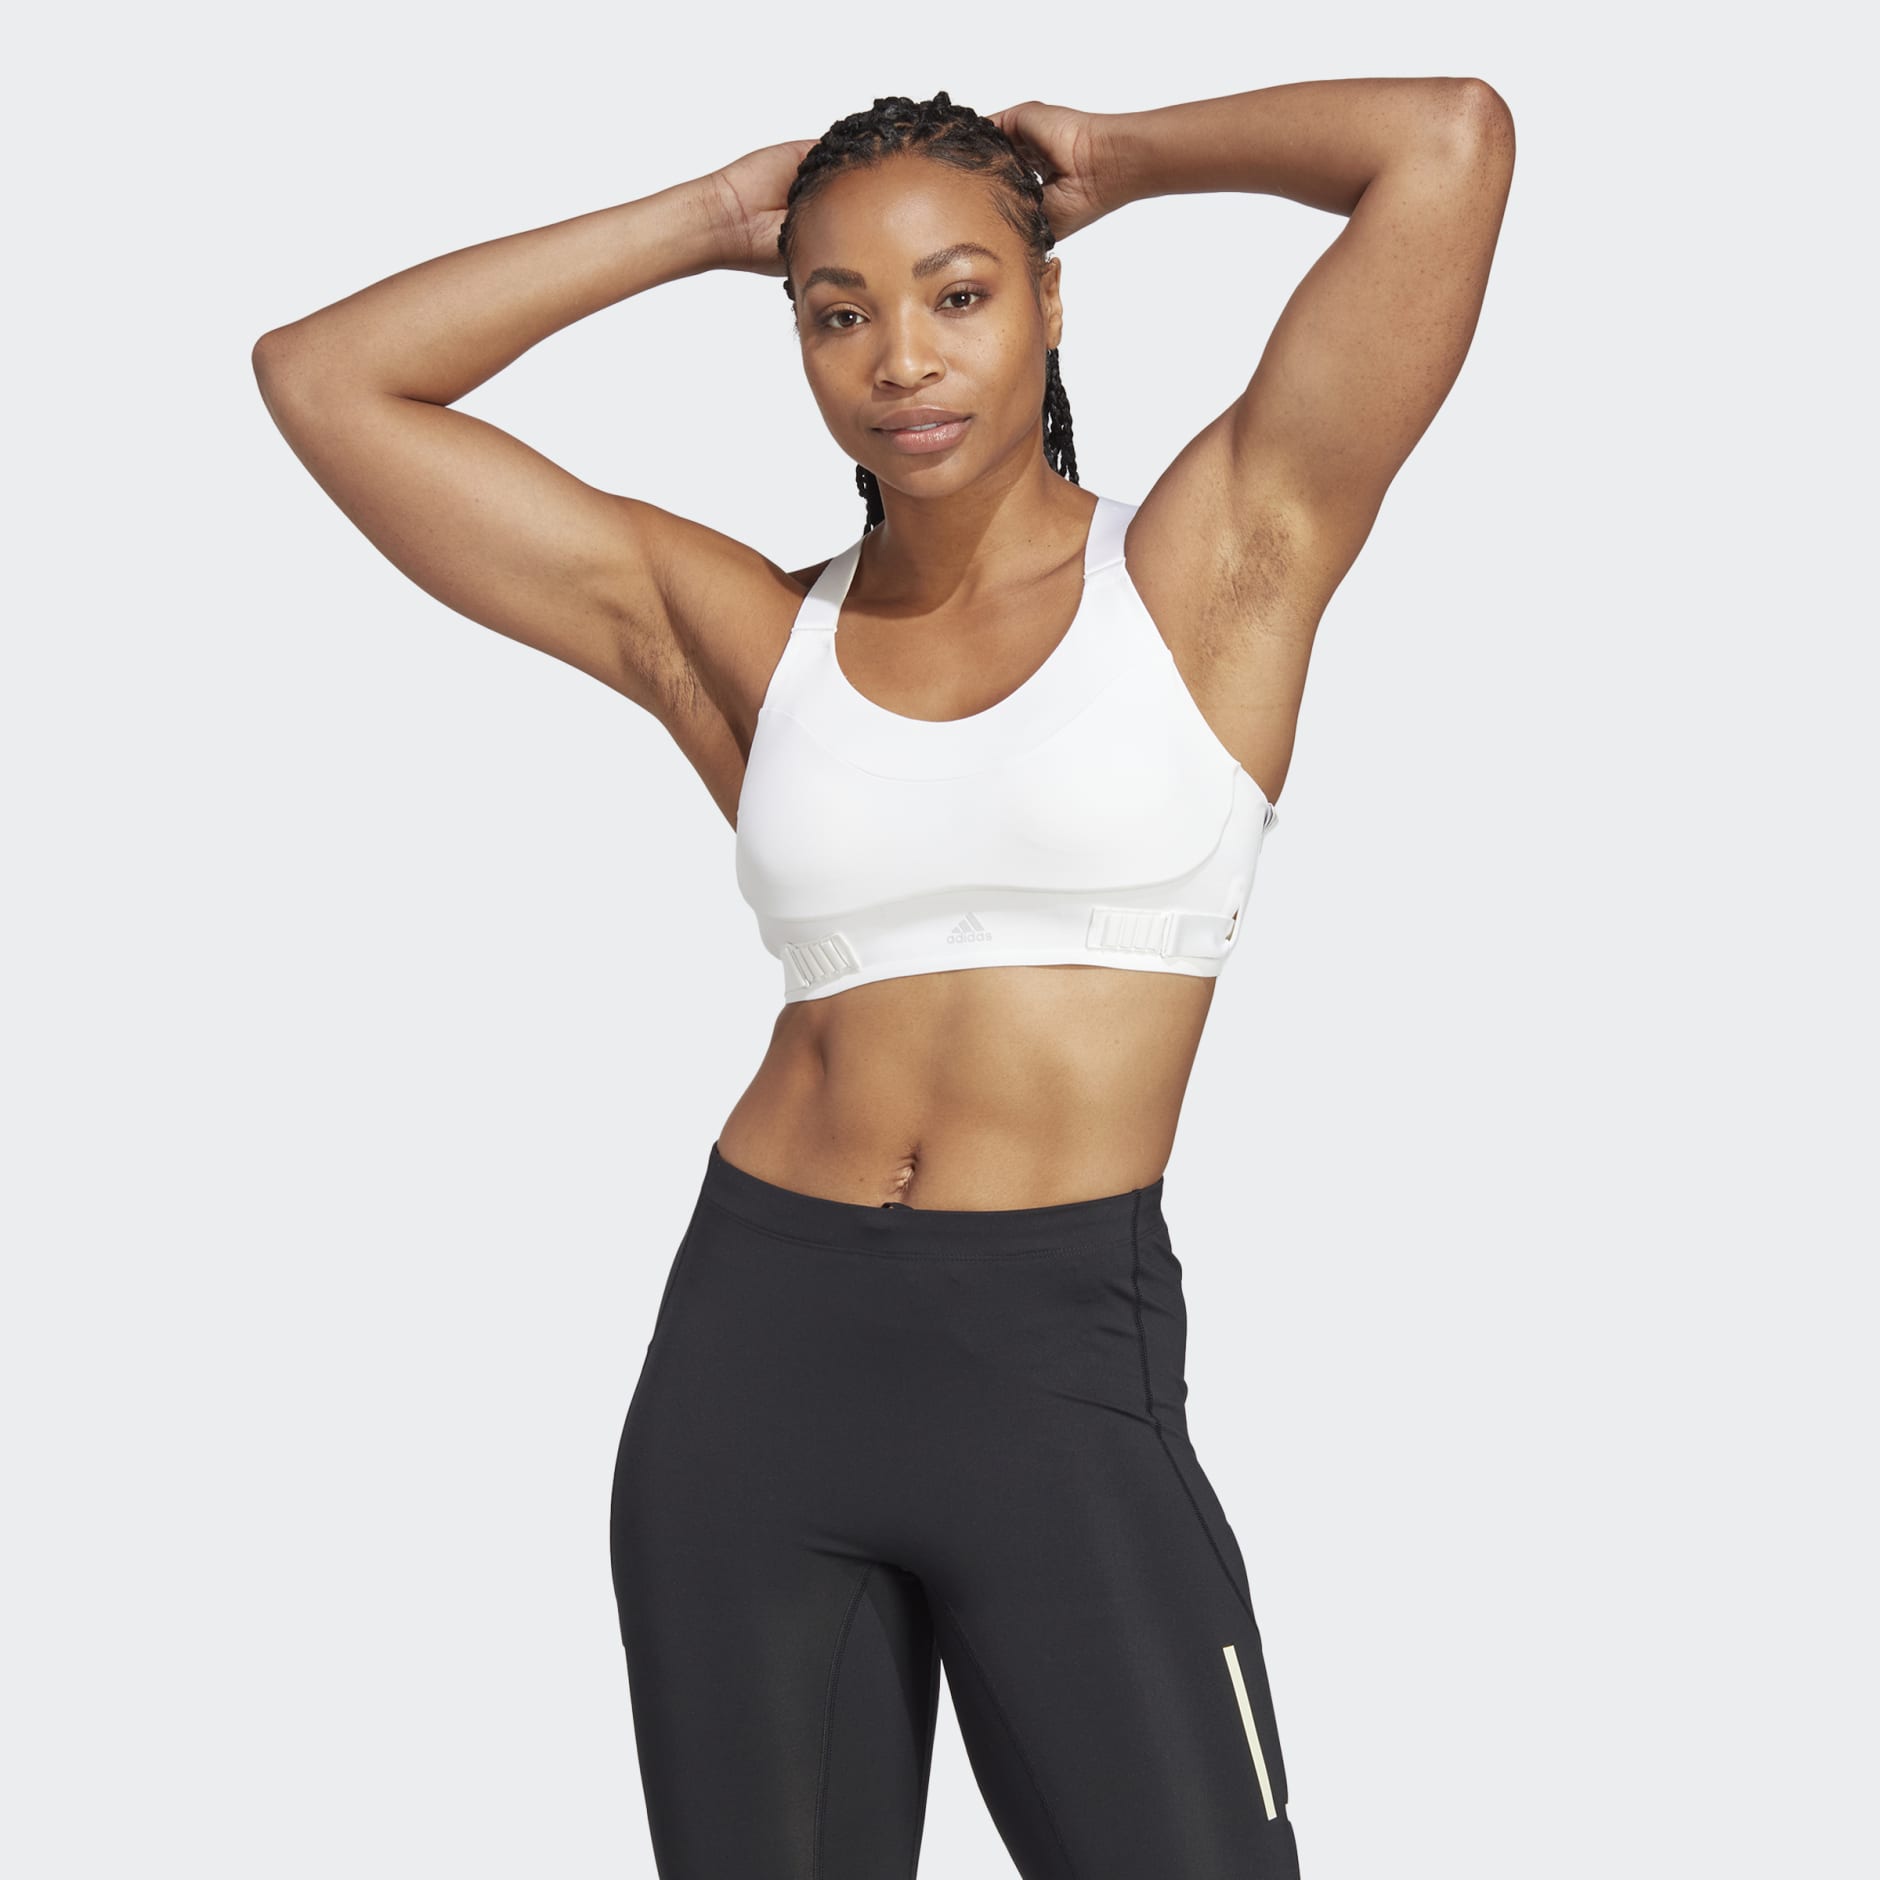 Buy ADIDAS fastimpact luxe run high-support sports bra Online